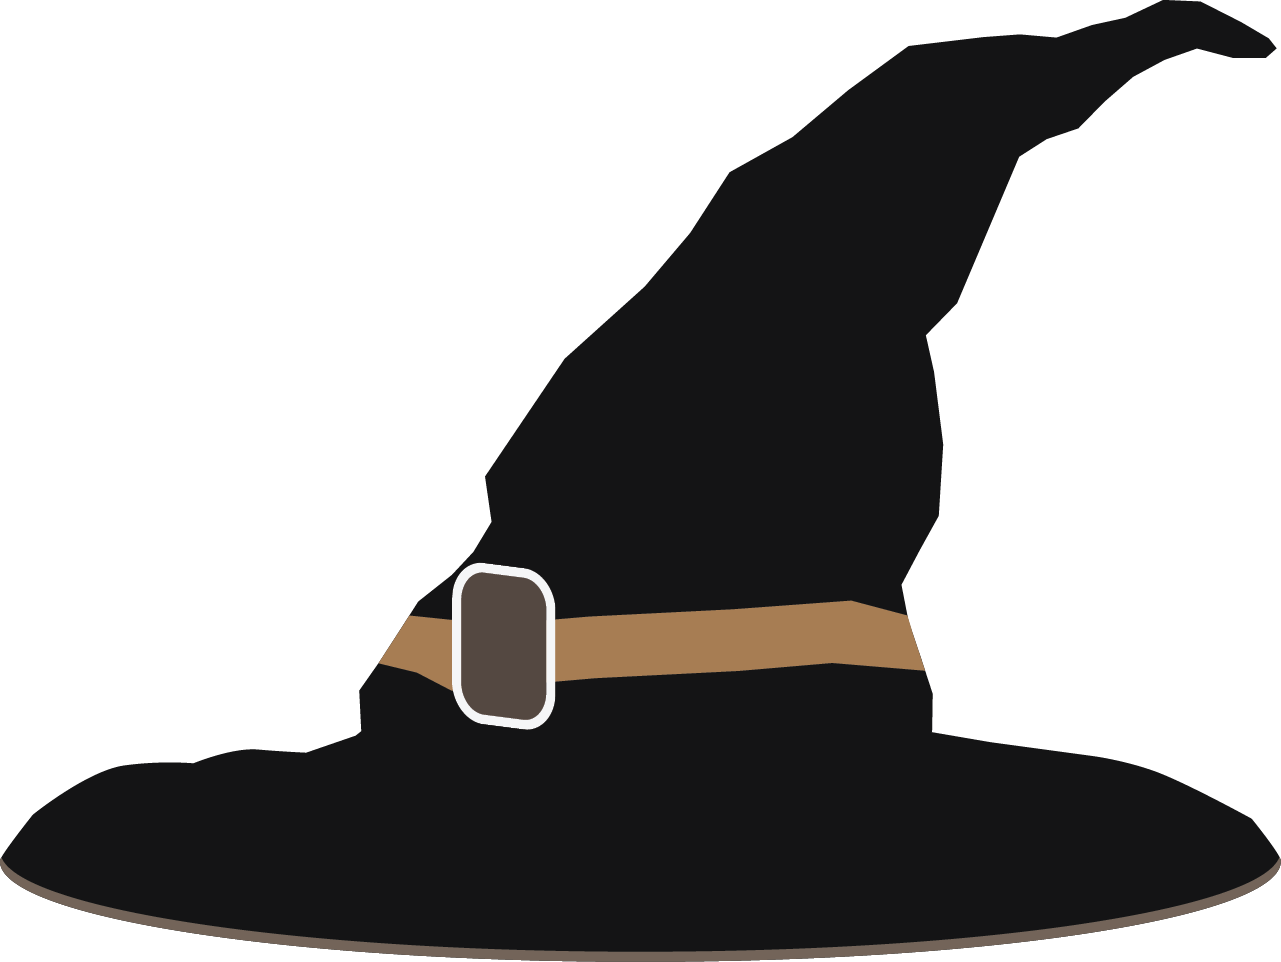 Witch hat free to use clipart